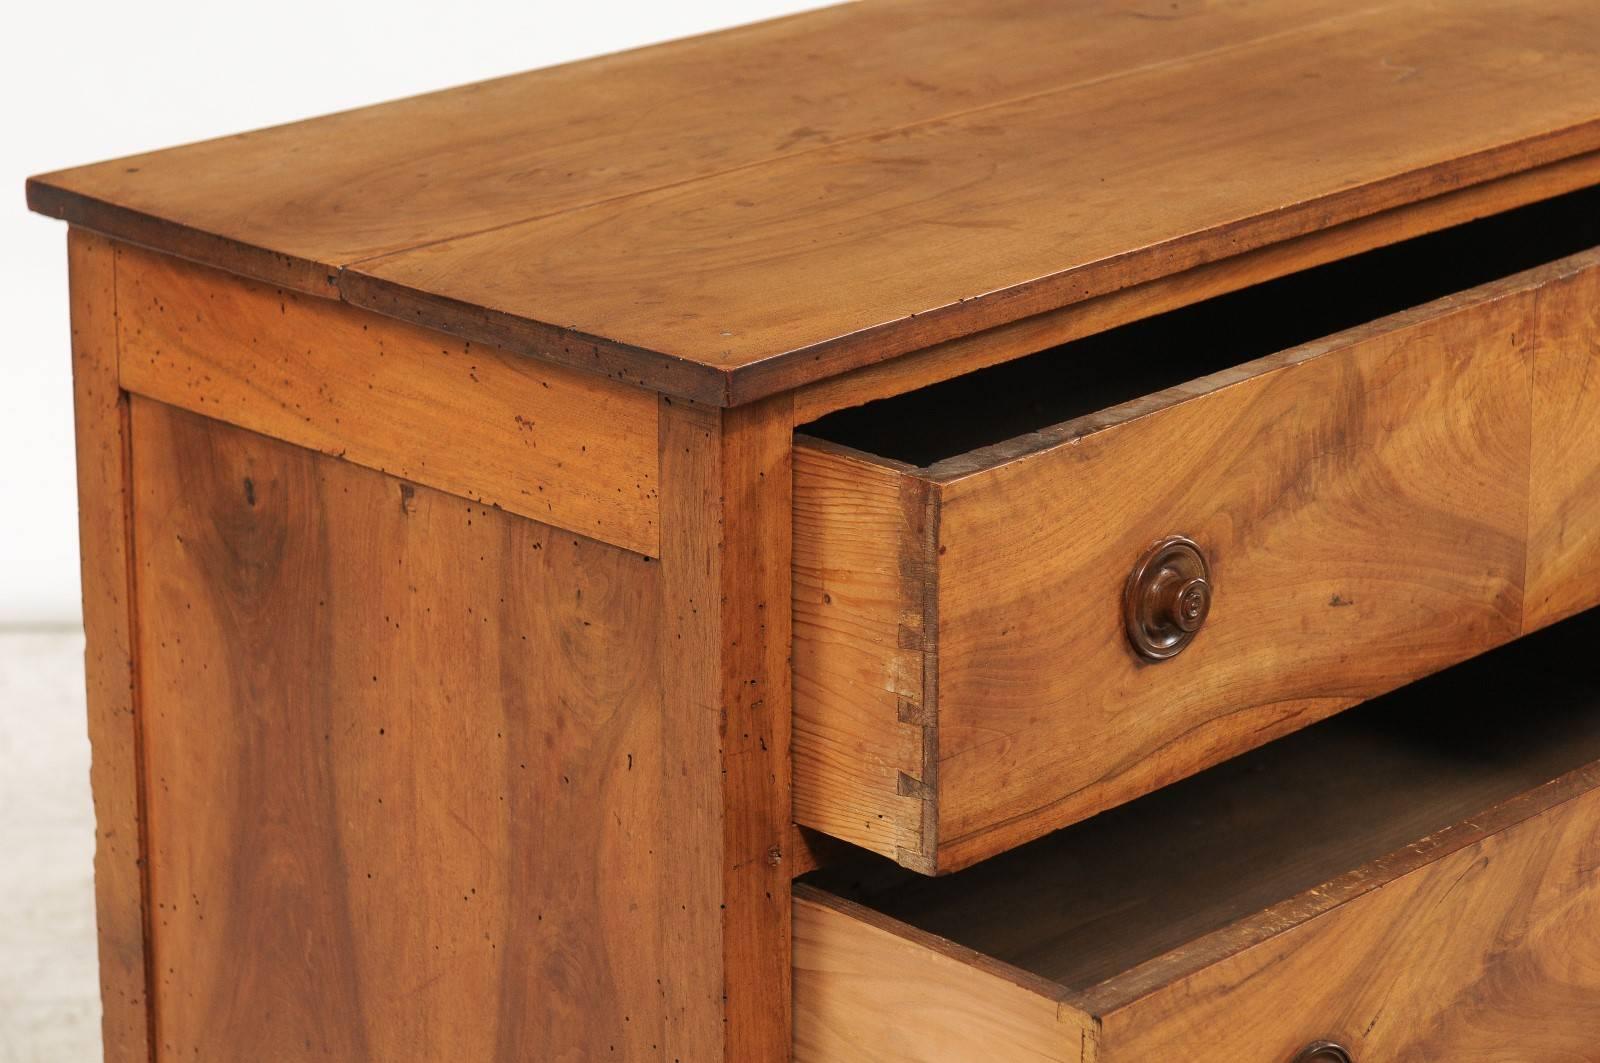 French Directoire Period Three-Drawer Chest with Bookmarked Walnut Veneer 1